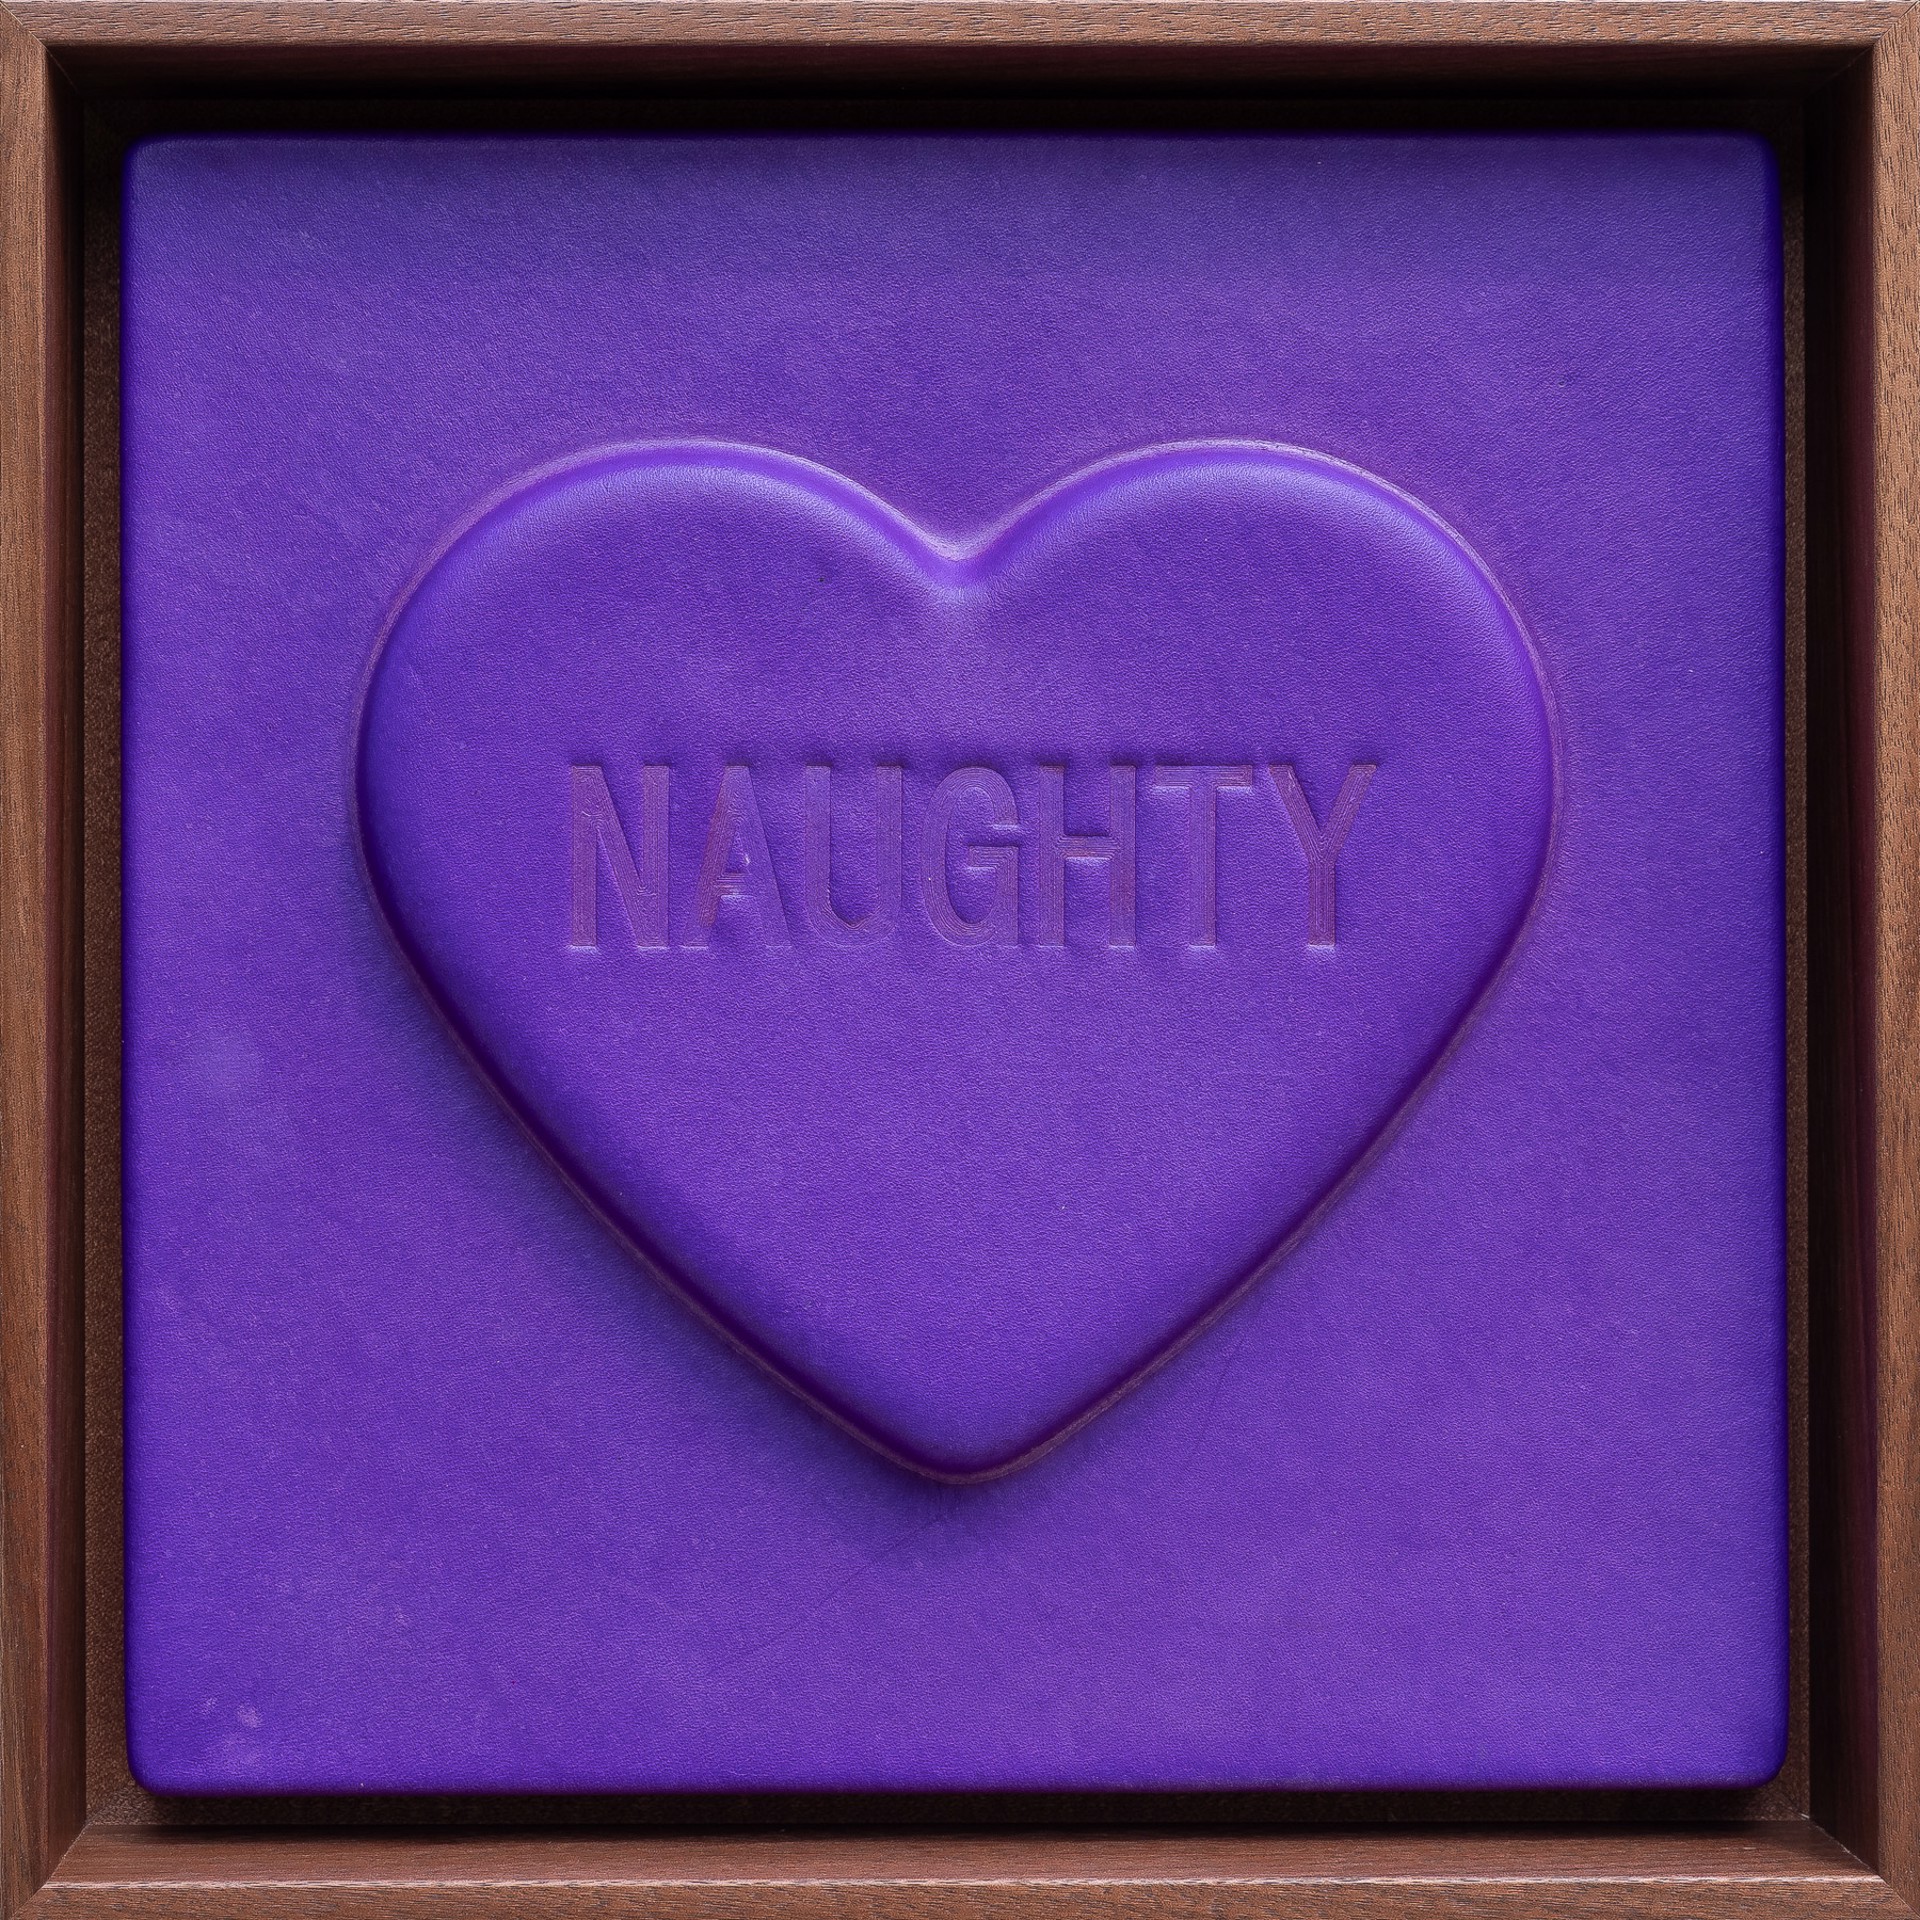 'NAUGHTY' - Sweetheart series by Mx. Hyde